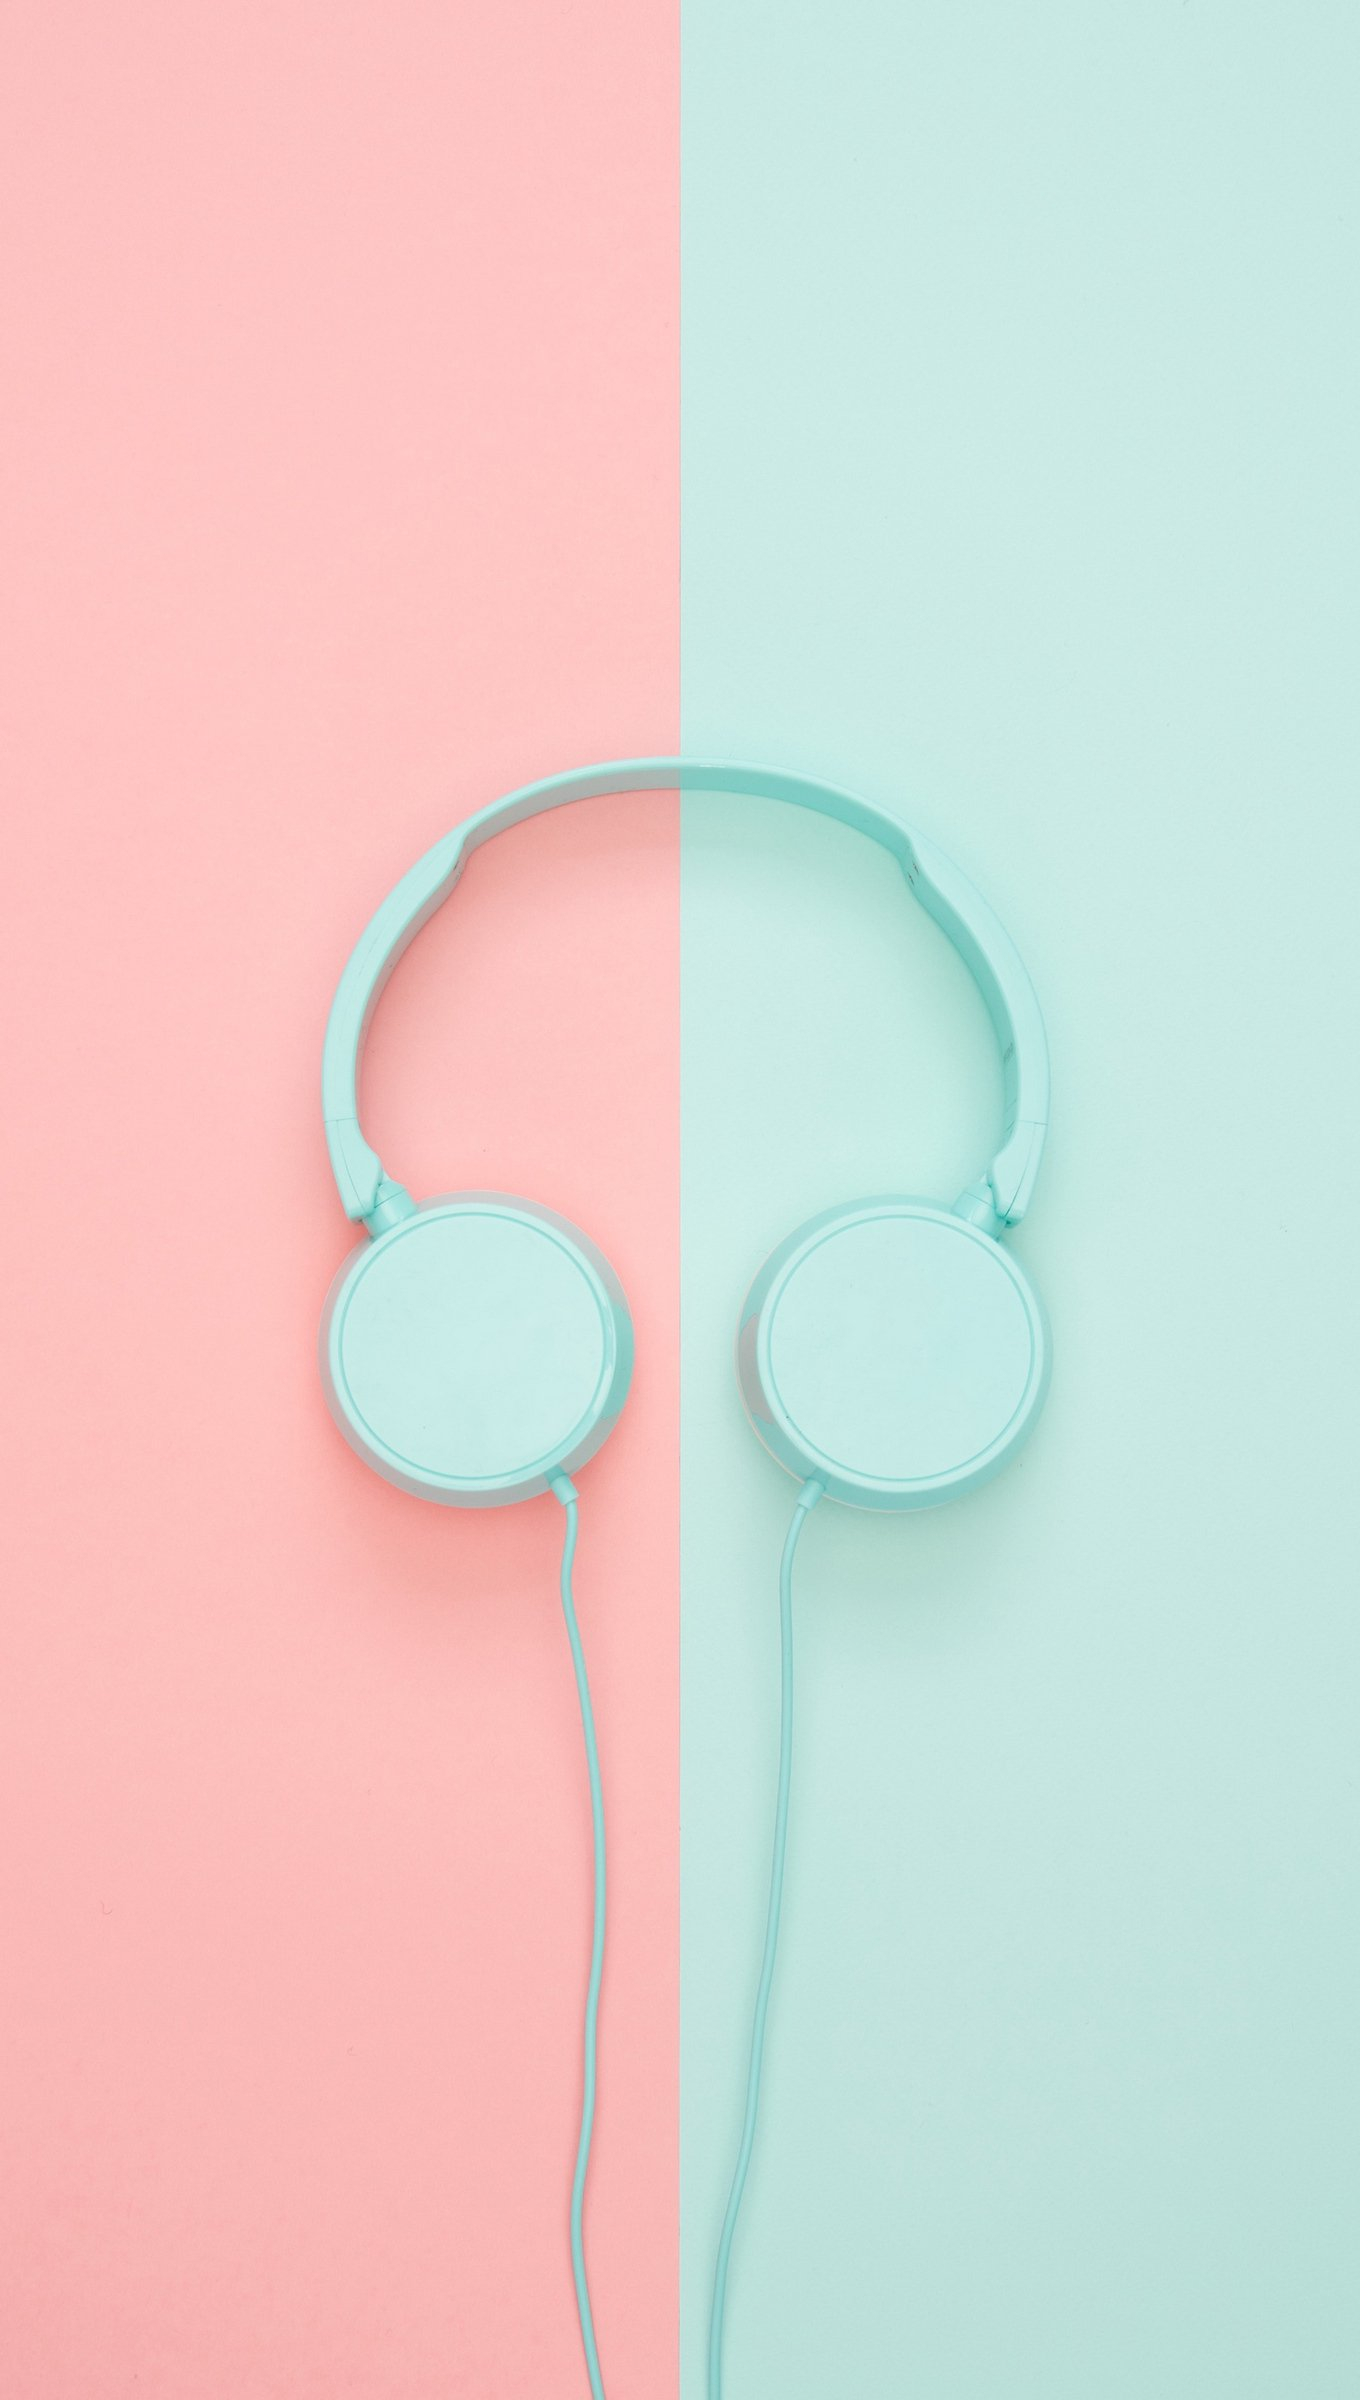 1360x2400 Headphones in pastel pink and blue Wallpaper 4k Ultra HD ID:3844